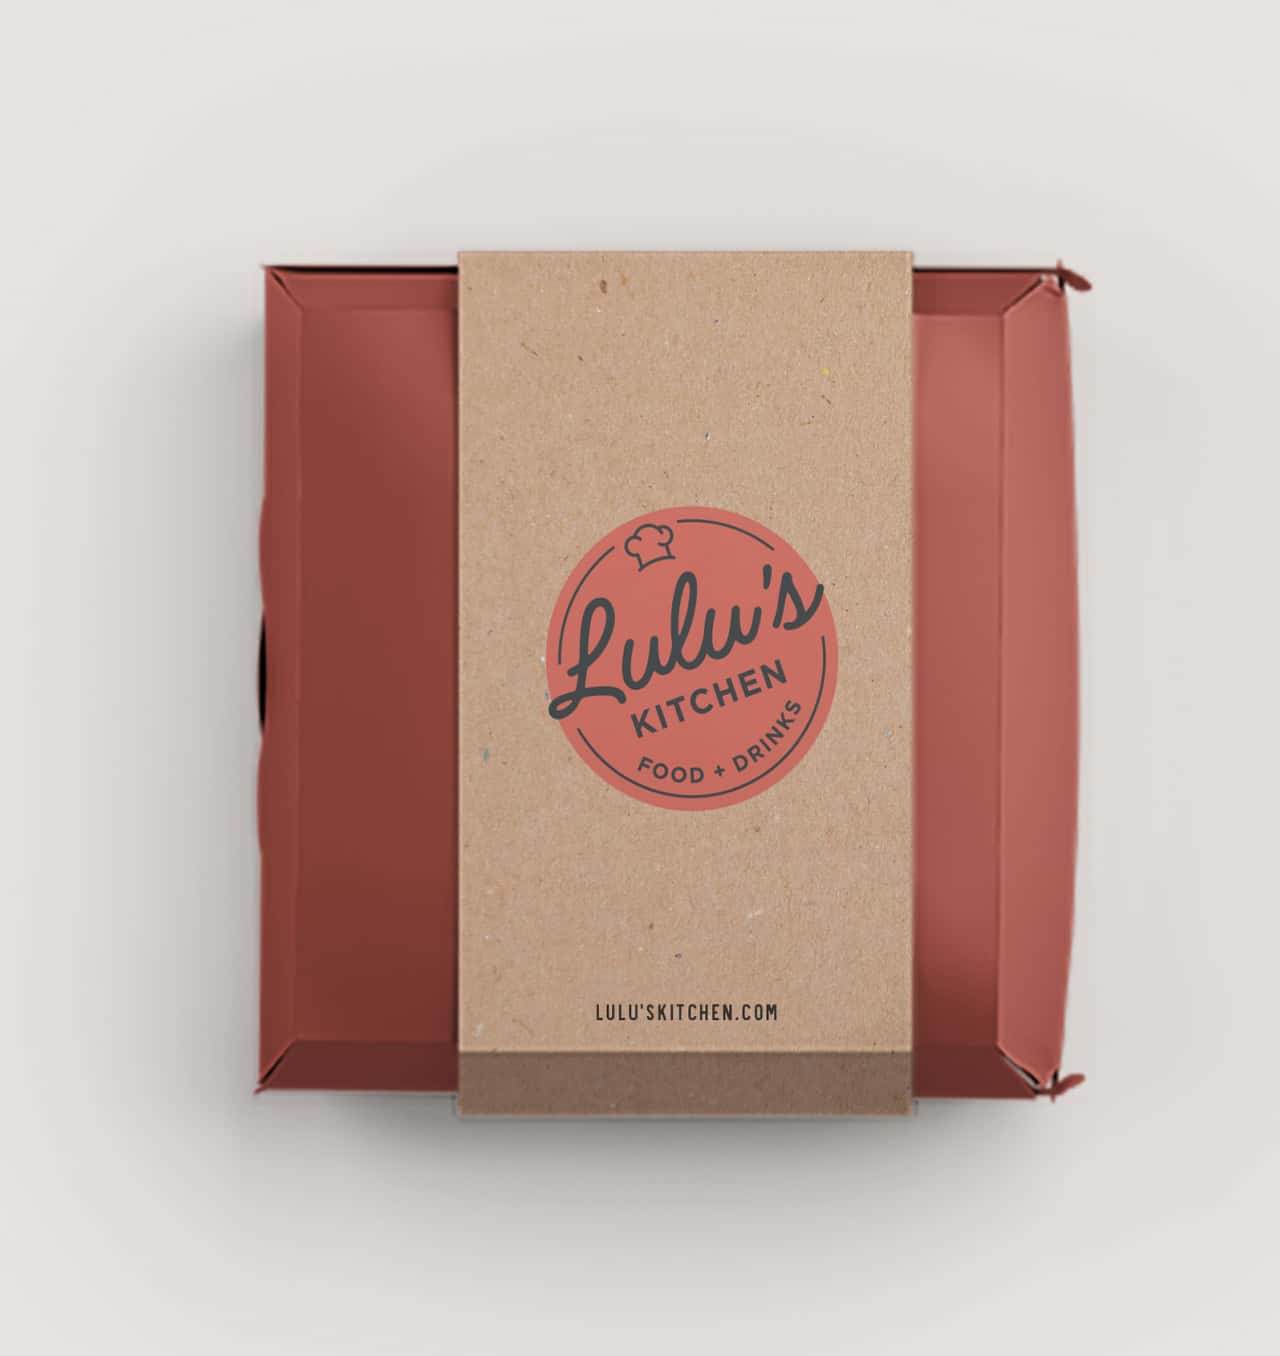 A carry-out bag from Lulu's Kitchen with the restaurant's logo on a kraft paper background, hinting at a takeout or delivery service.